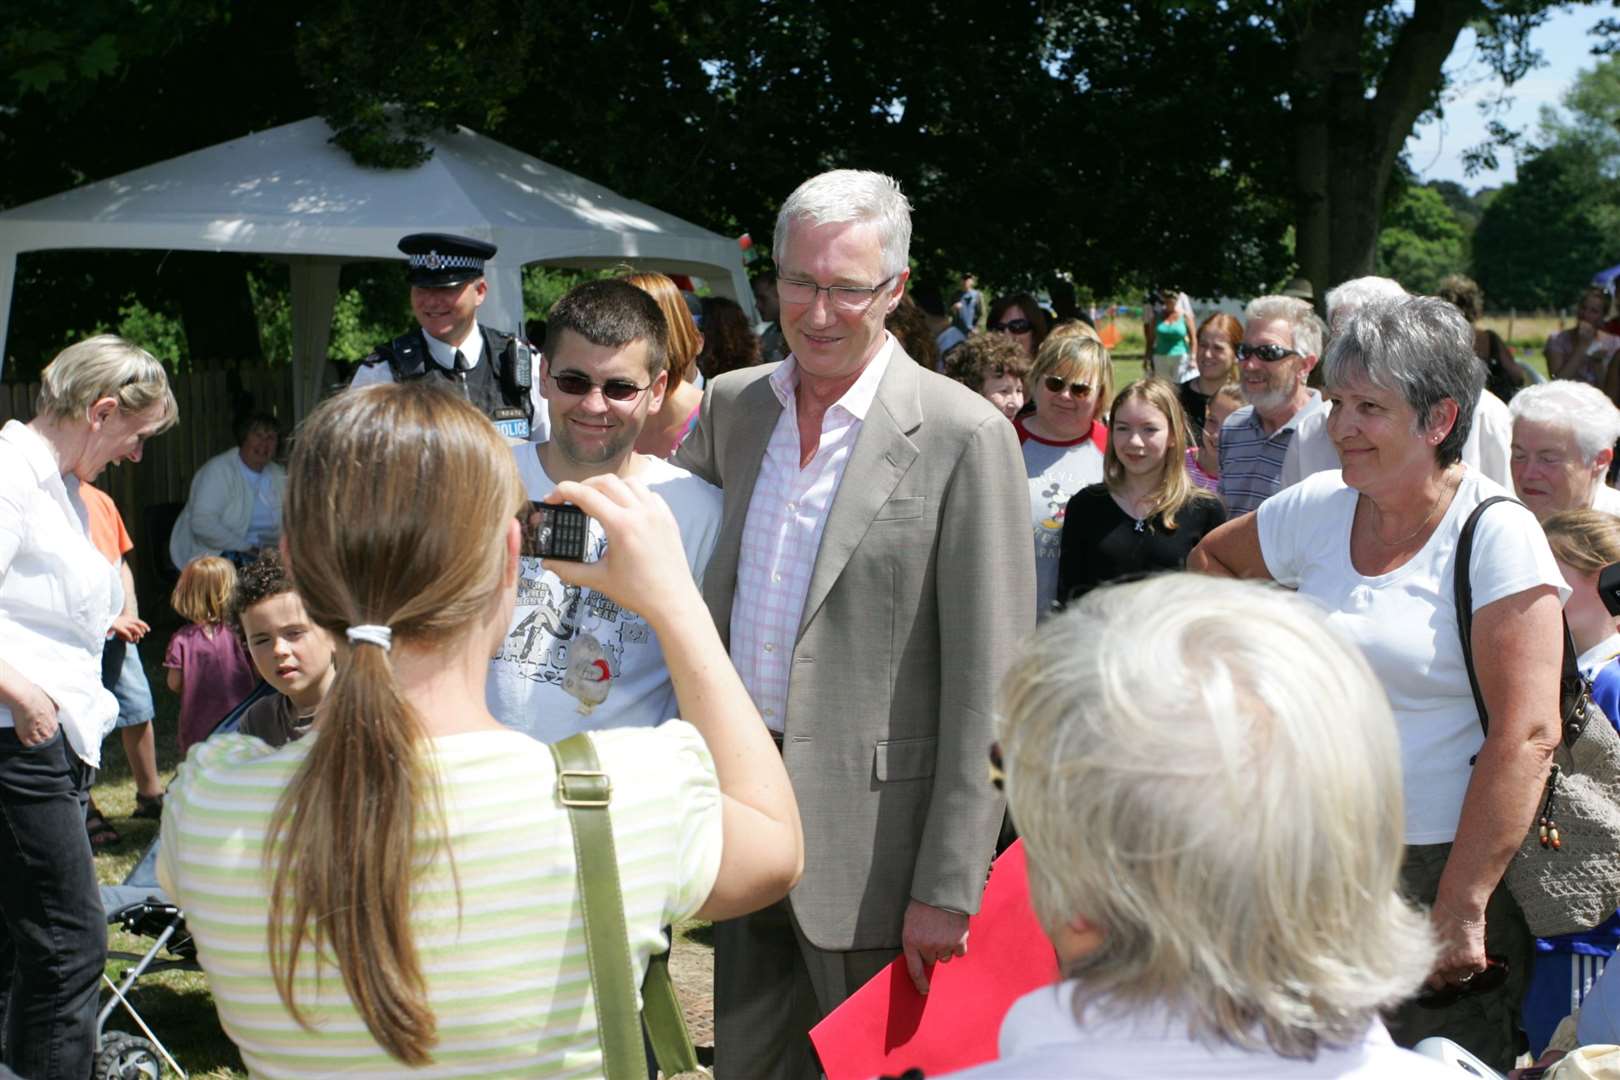 Paul O'Grady would have his picture taken with fans at the fetes